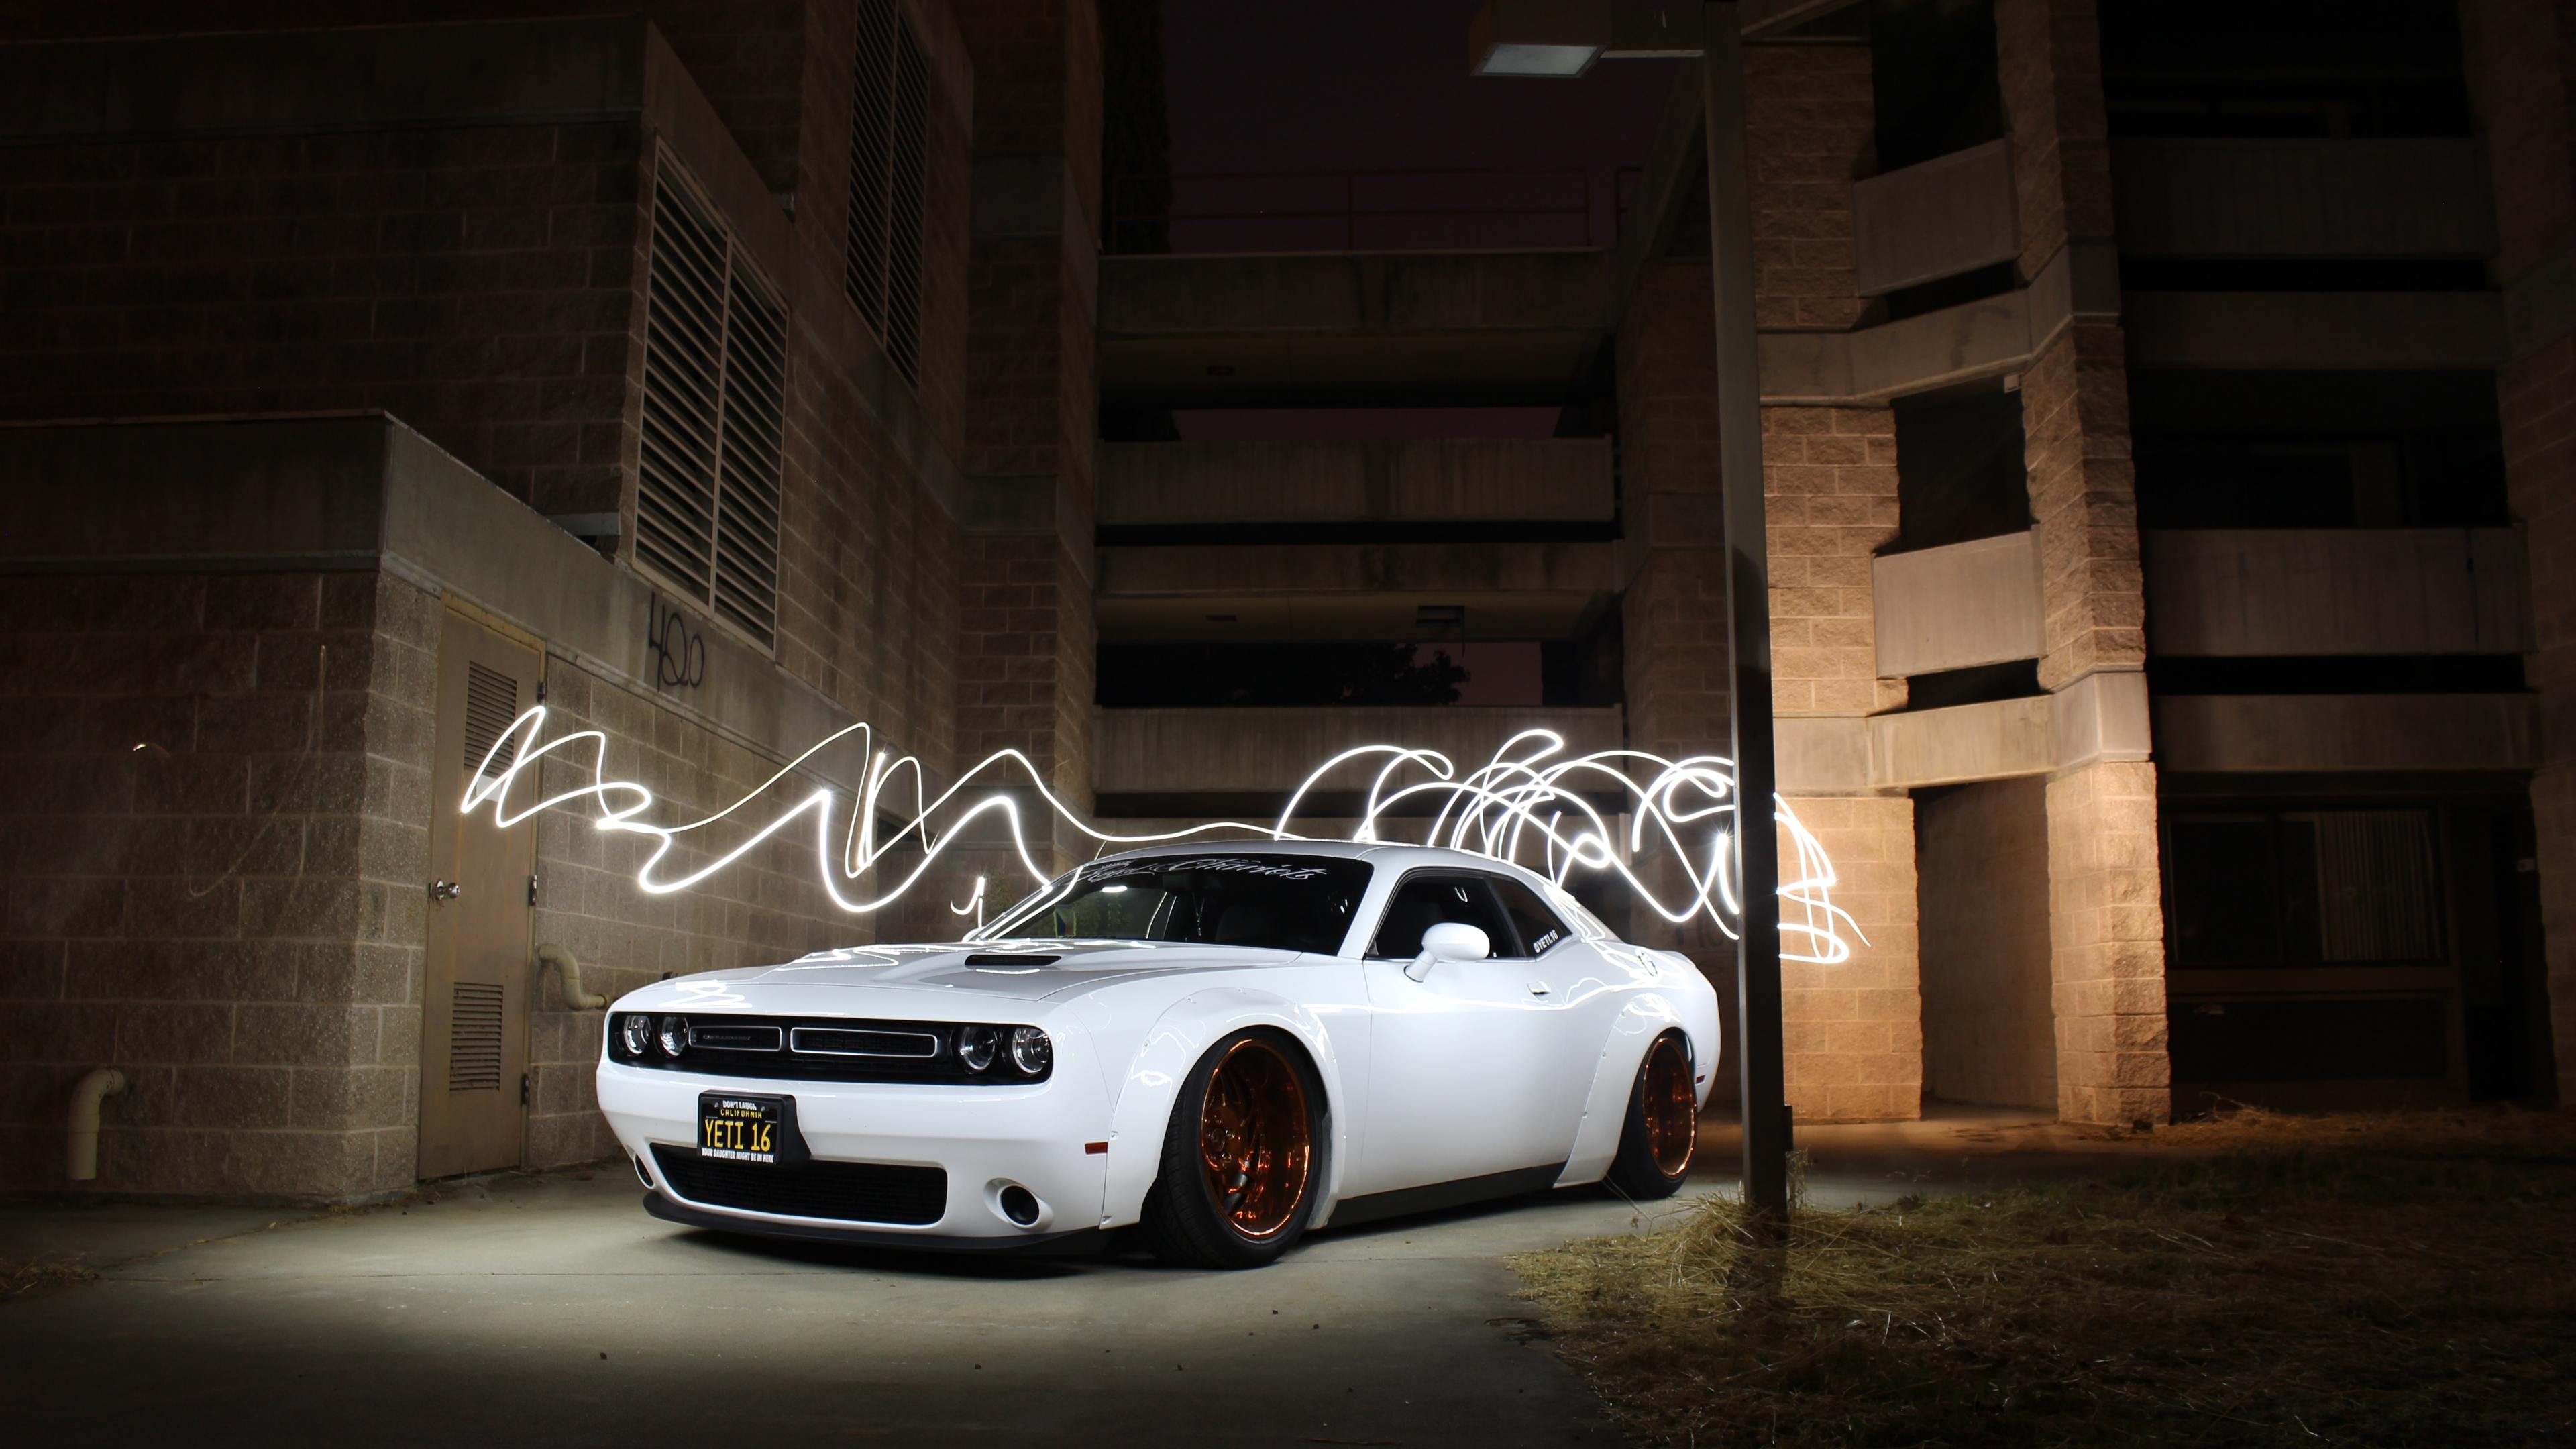 dodge challenger muscle car photography long exposure 1539112140 - Dodge Challenger Muscle Car Photography Long Exposure - photography wallpapers, hd-wallpapers, dodge challenger wallpapers, cars wallpapers, 5k wallpapers, 4k-wallpapers